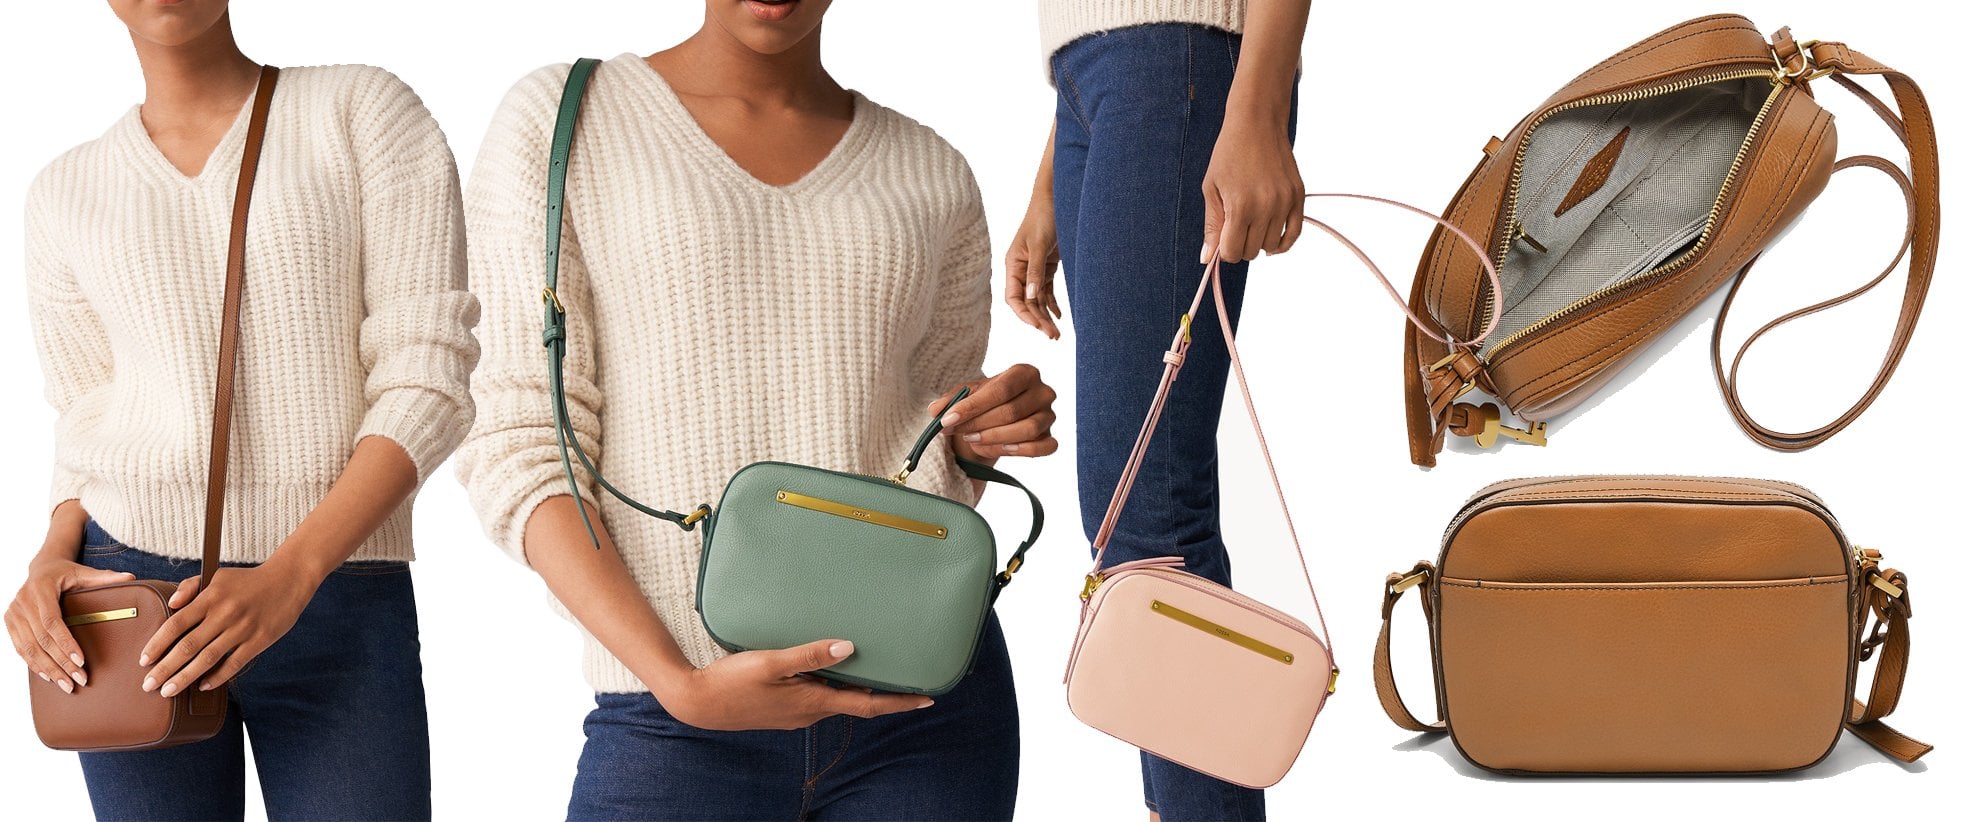 Inspired by vintage camera bags, the Liza style is the perfect on-the-go bag that can fit your essentials, including your iPhone 13 or Samsung Galaxy S22